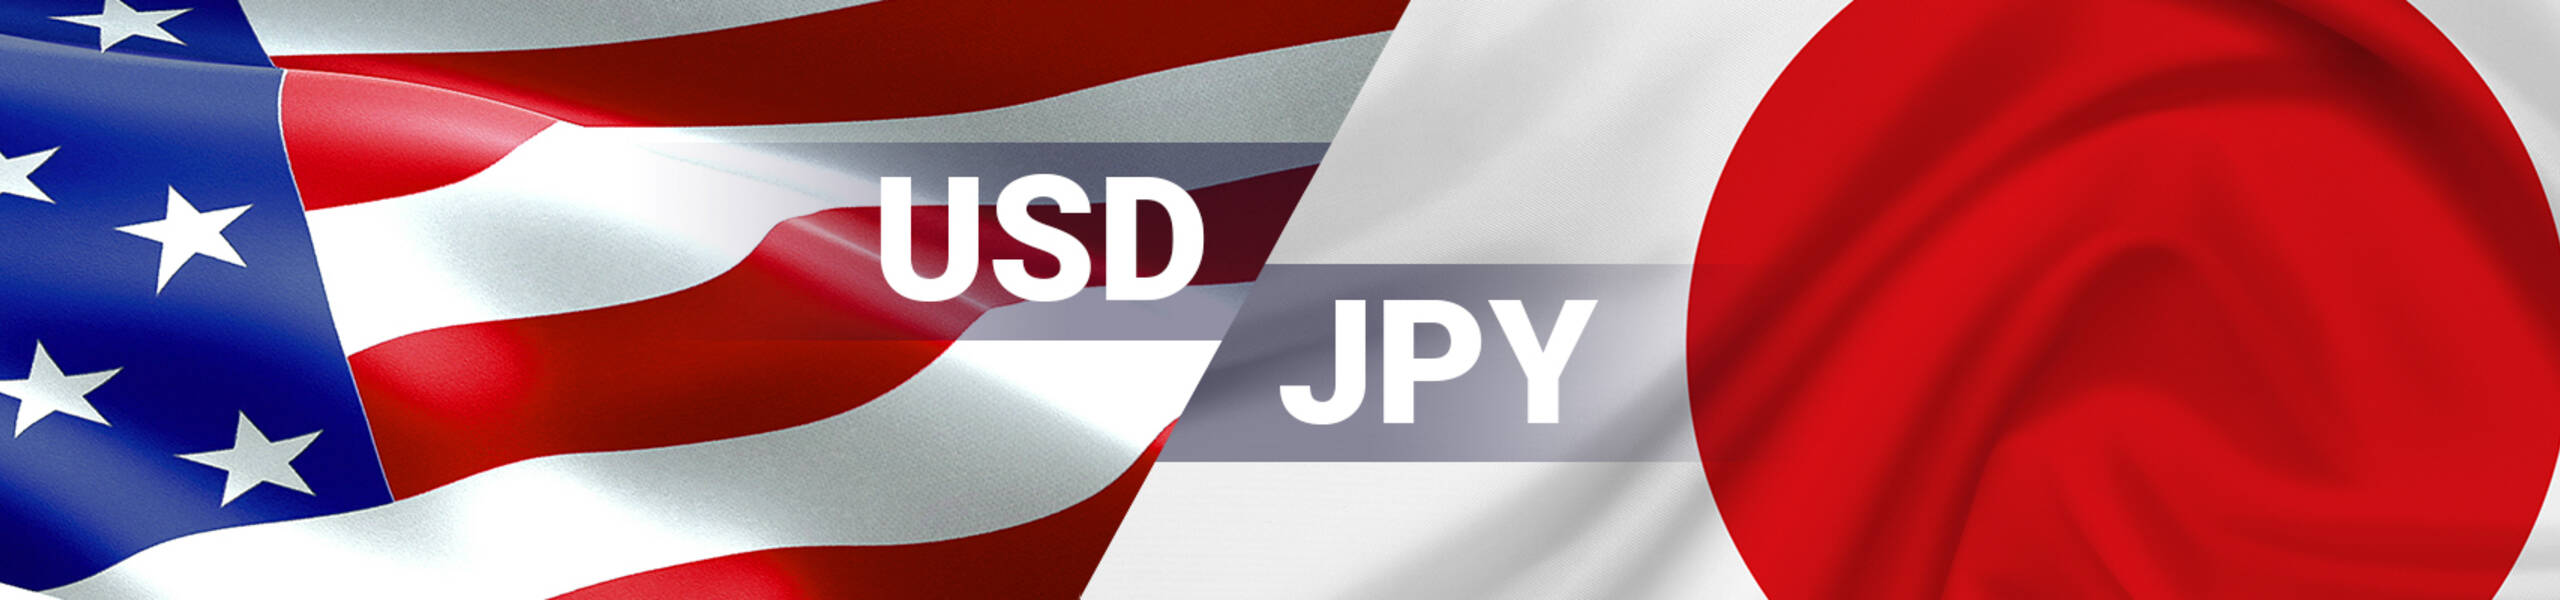 USD/JPY: Dollar will continue downtrend